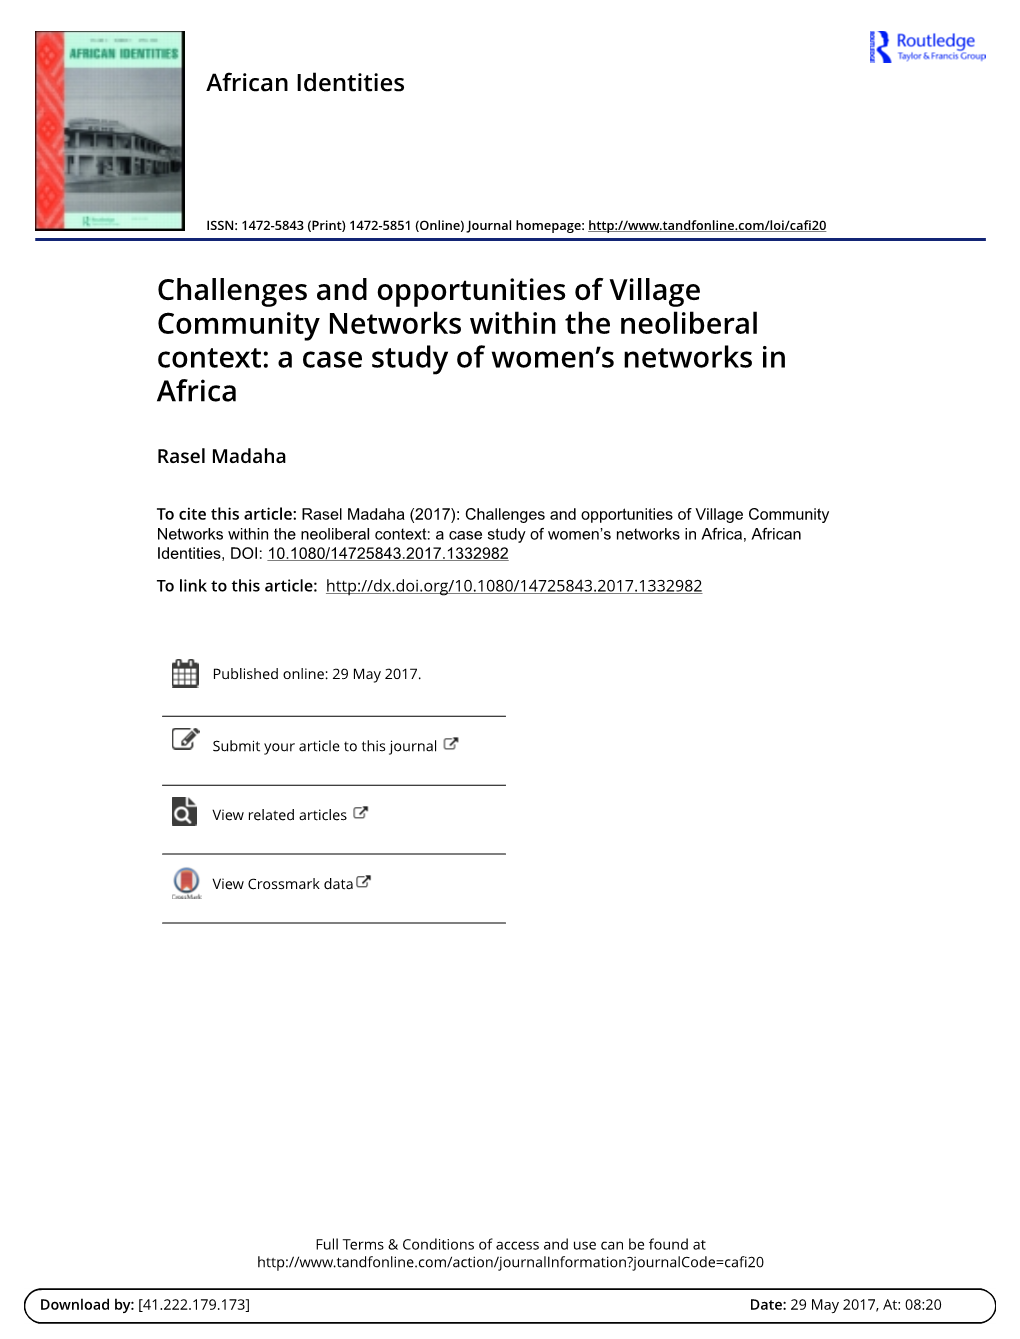 Challenges and Opportunities of Village Community Networks Within the Neoliberal Context: a Case Study of Women’S Networks in Africa